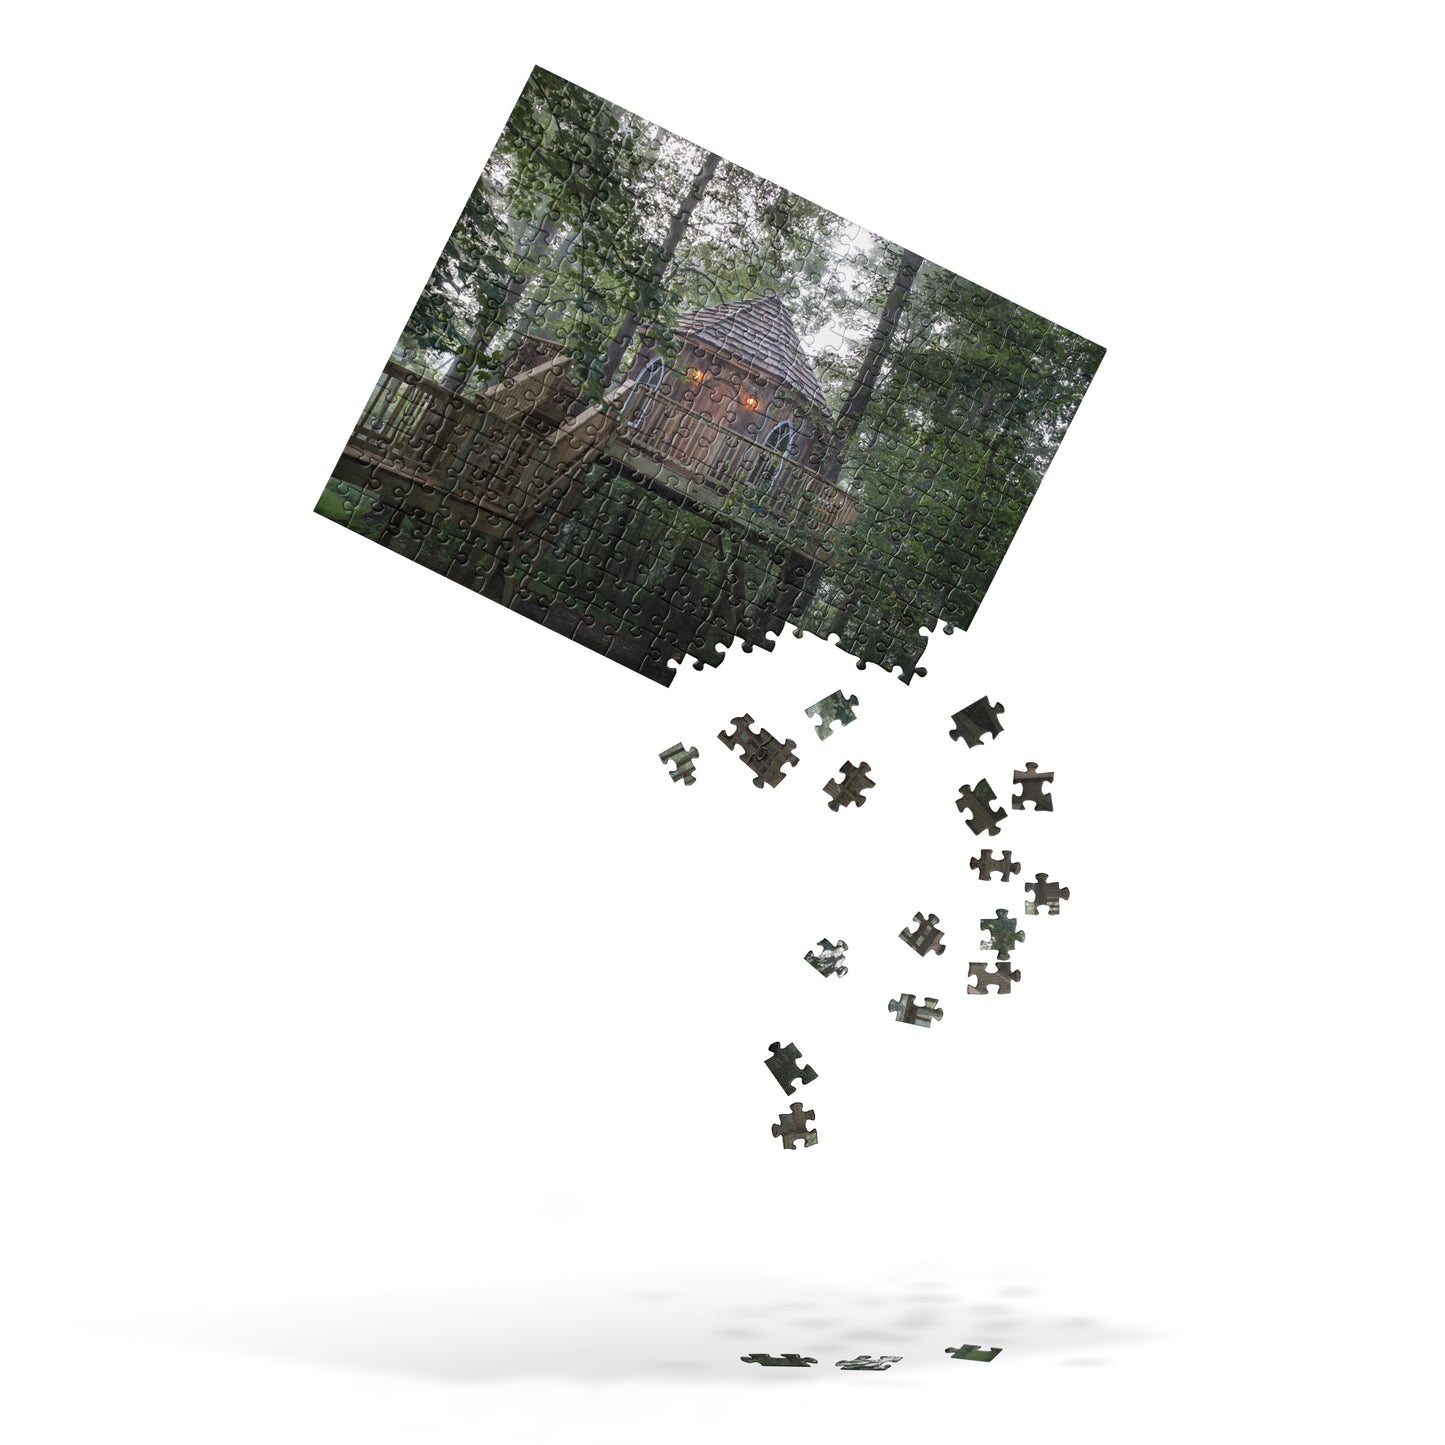 The Nest Jigsaw puzzle